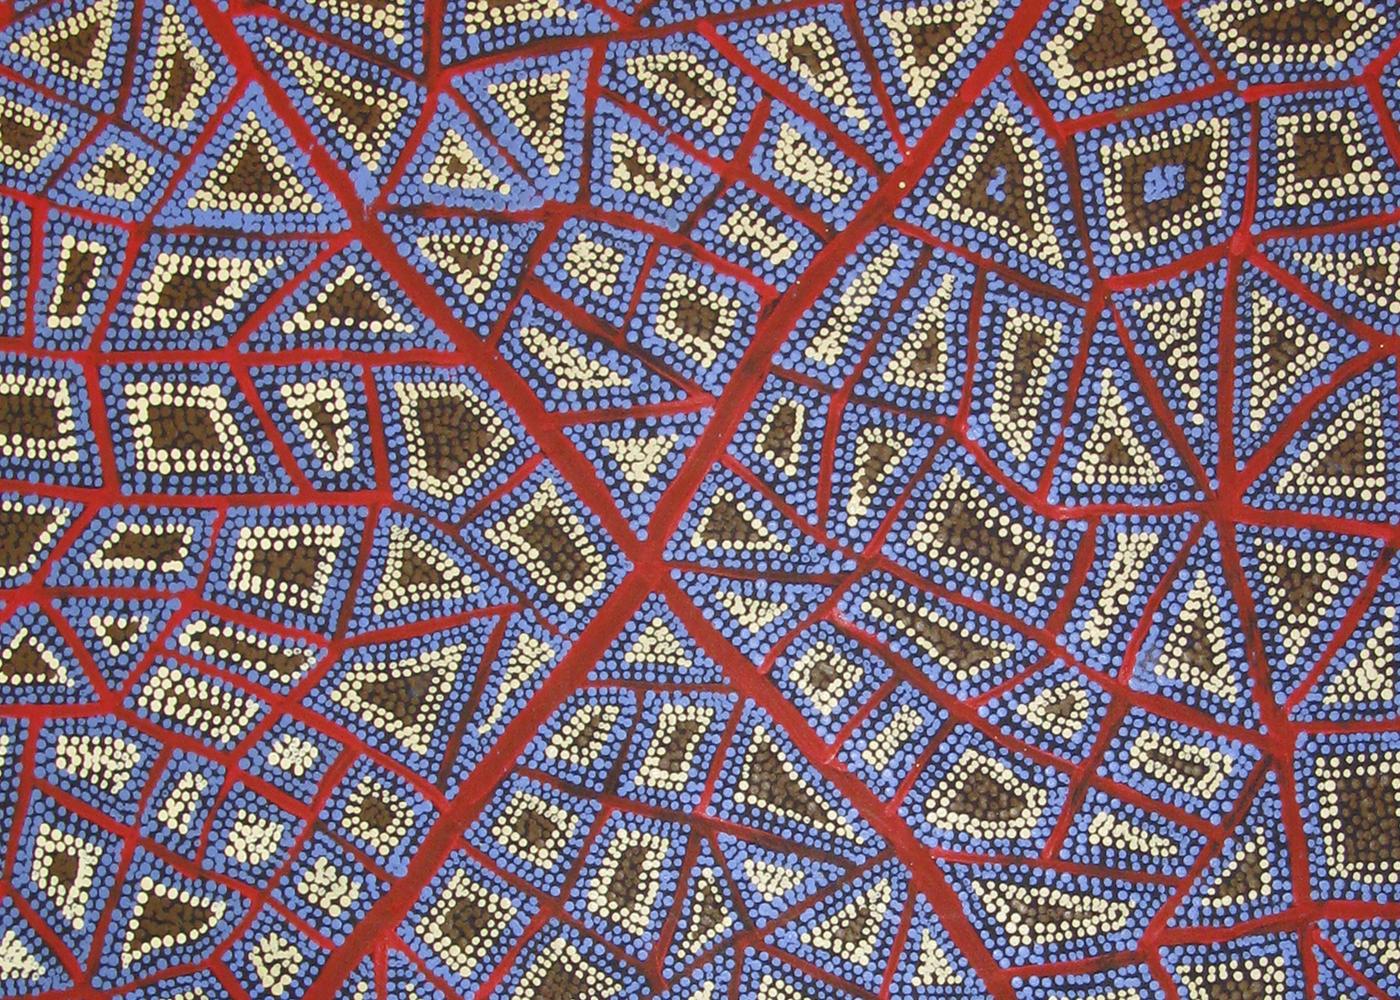 Adrian Young was a traditional Aboriginal man who painted at Tjarlirli Arts in Western Australia. He was one of community’s most senior men, and a very fine painter. He began his painting career at Papunya Tula Artists and stylistically, his art